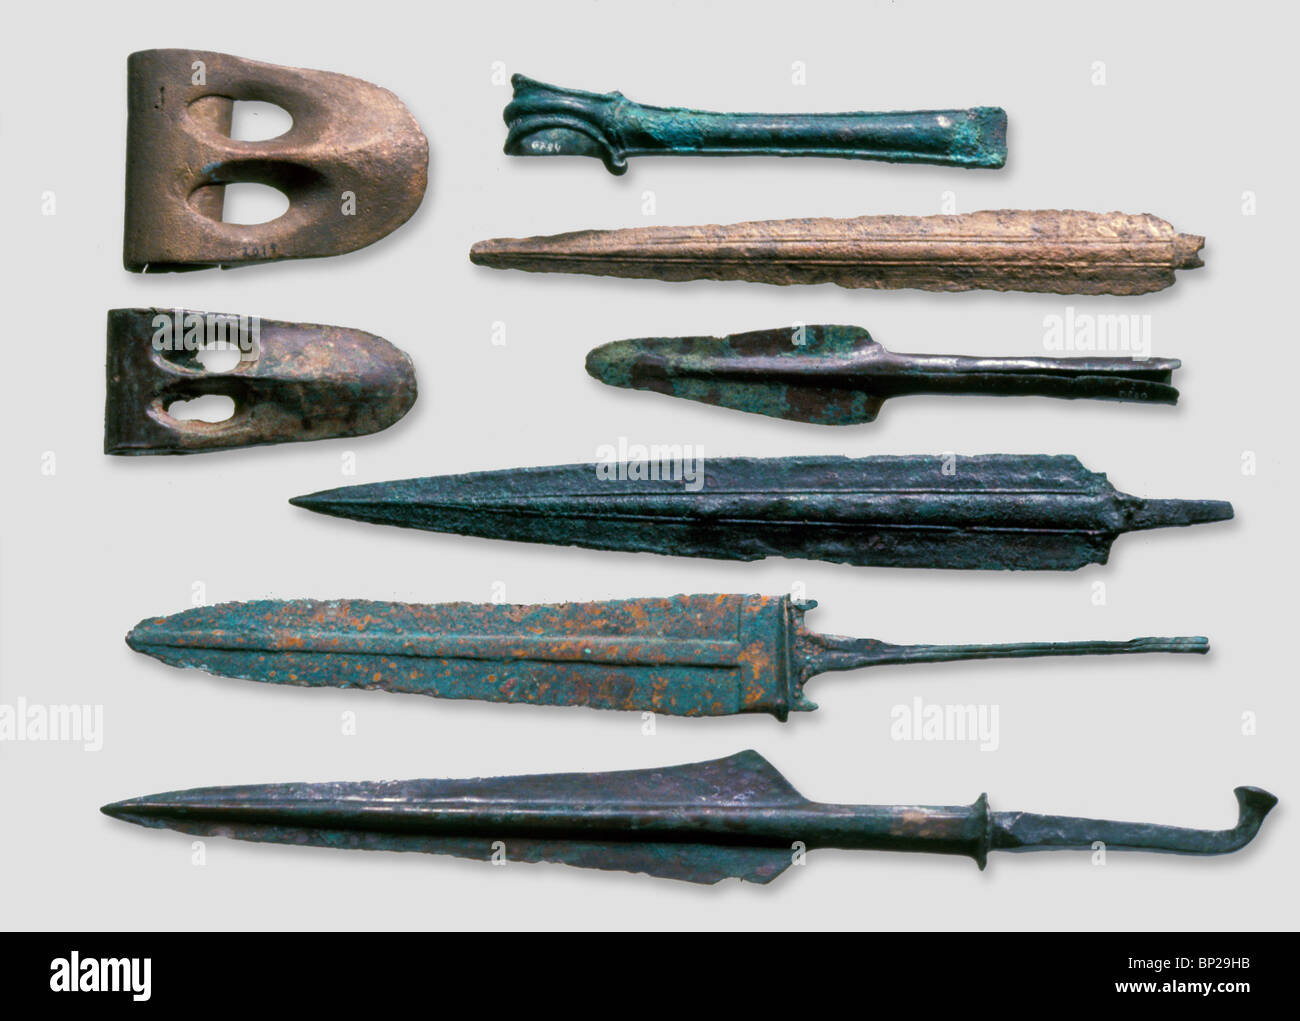 BRONZE SWORDS AND AX-HEADS FOUND IN EXCAVATIONS IN JUDEA, DATING FROM THE MIDDLE BRONZE CANAANITE PERIOD, C. 2000-1750 B.C. Stock Photo